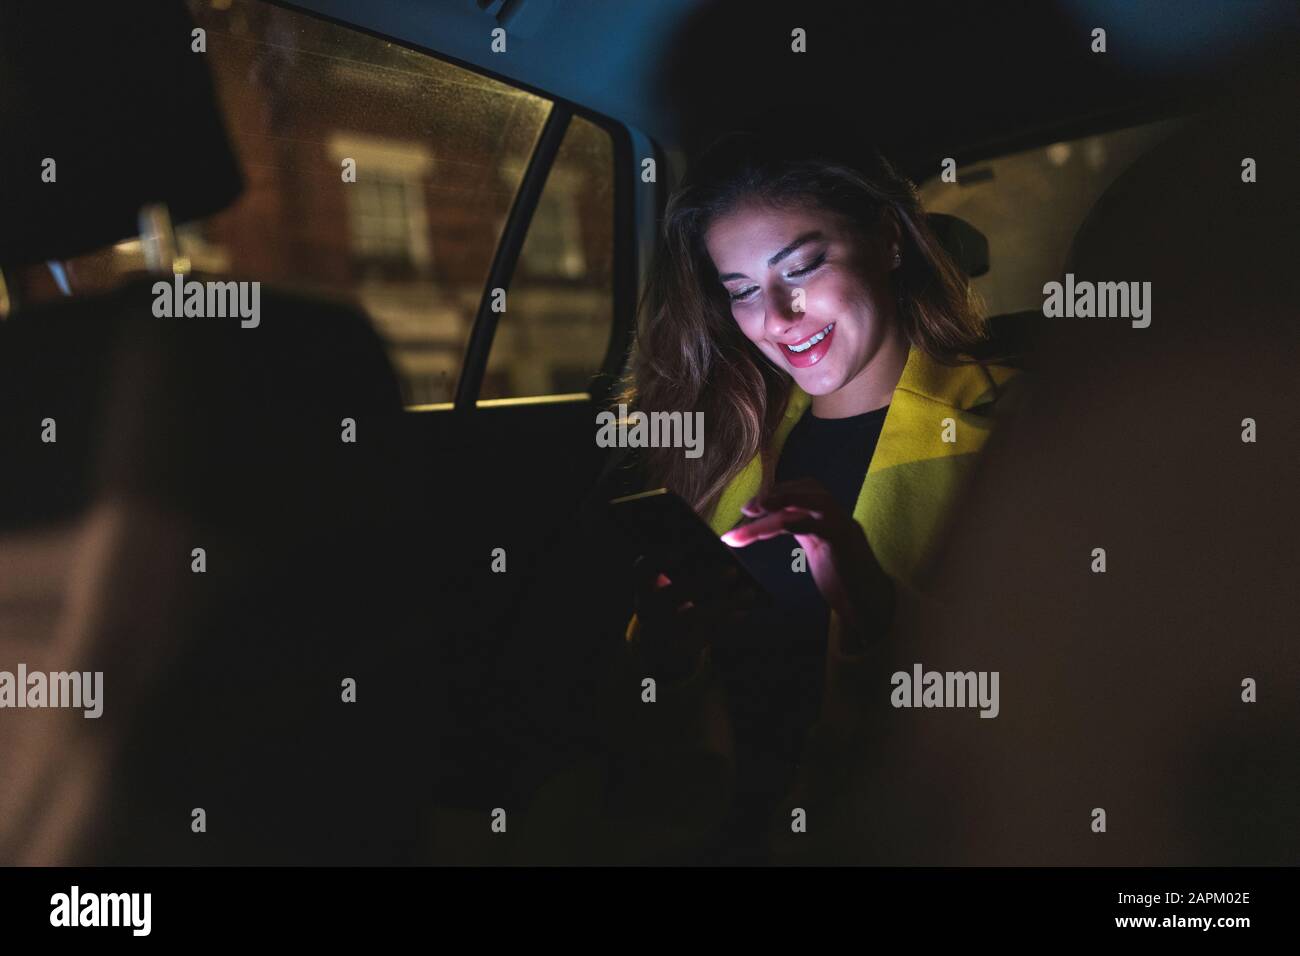 Woman sitting on the backseat of a car in the city at night Stock Photo